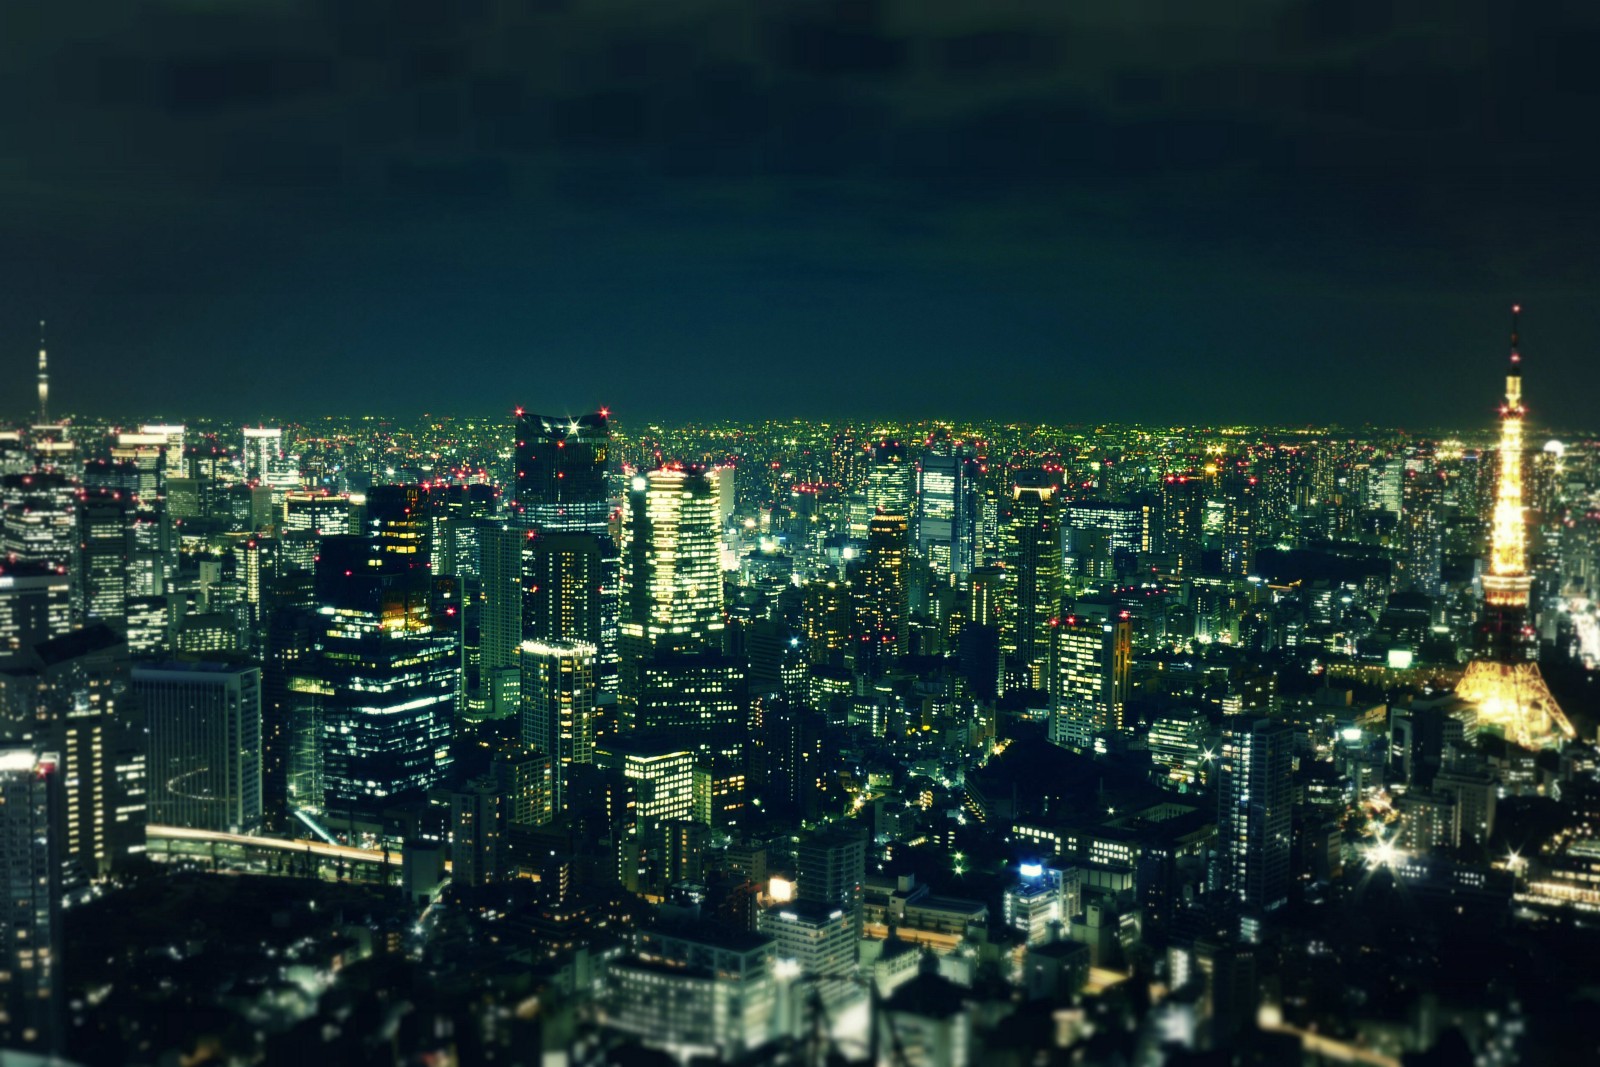 The night view of Tokyo from the Roppongi Hills observatory